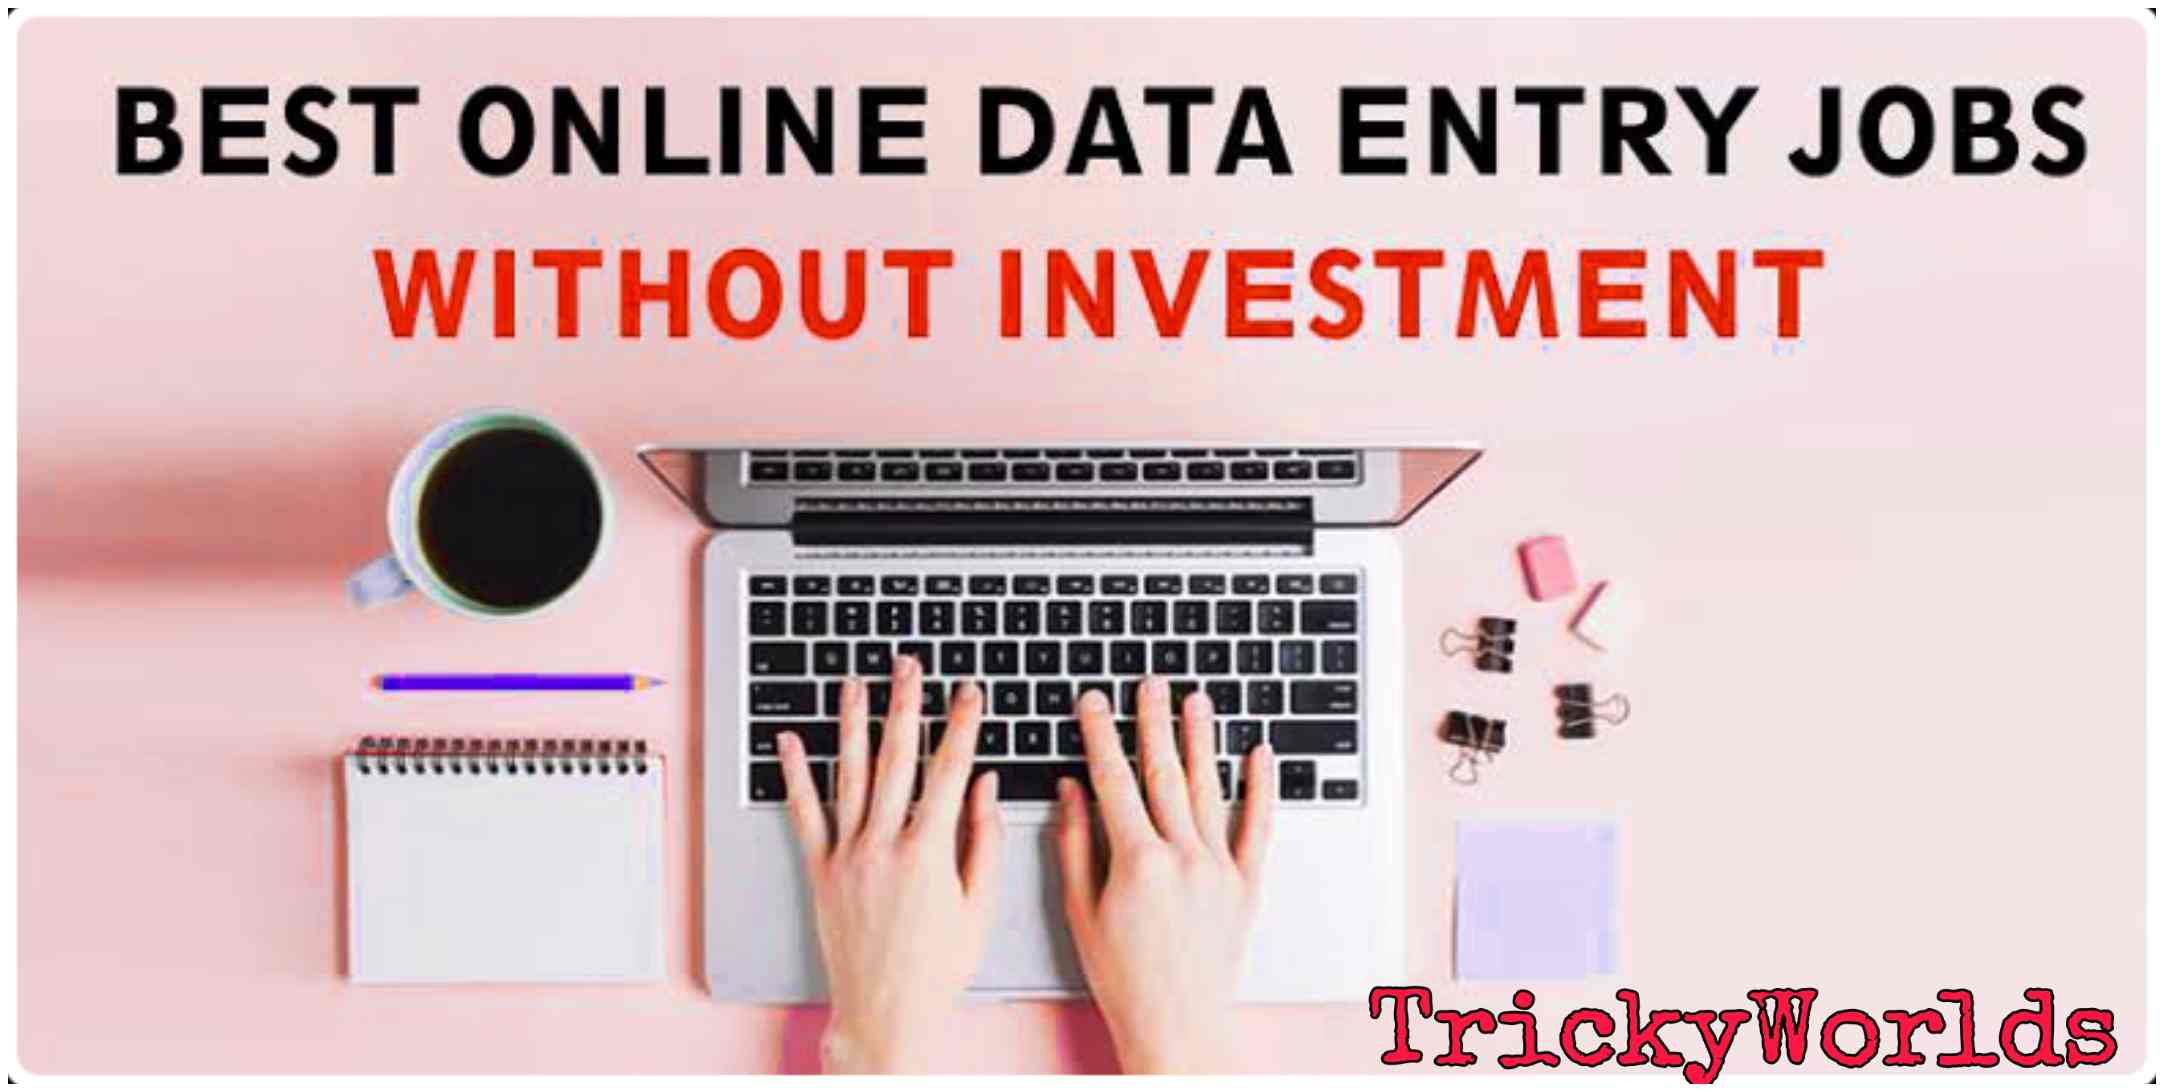 earn money online with data entry